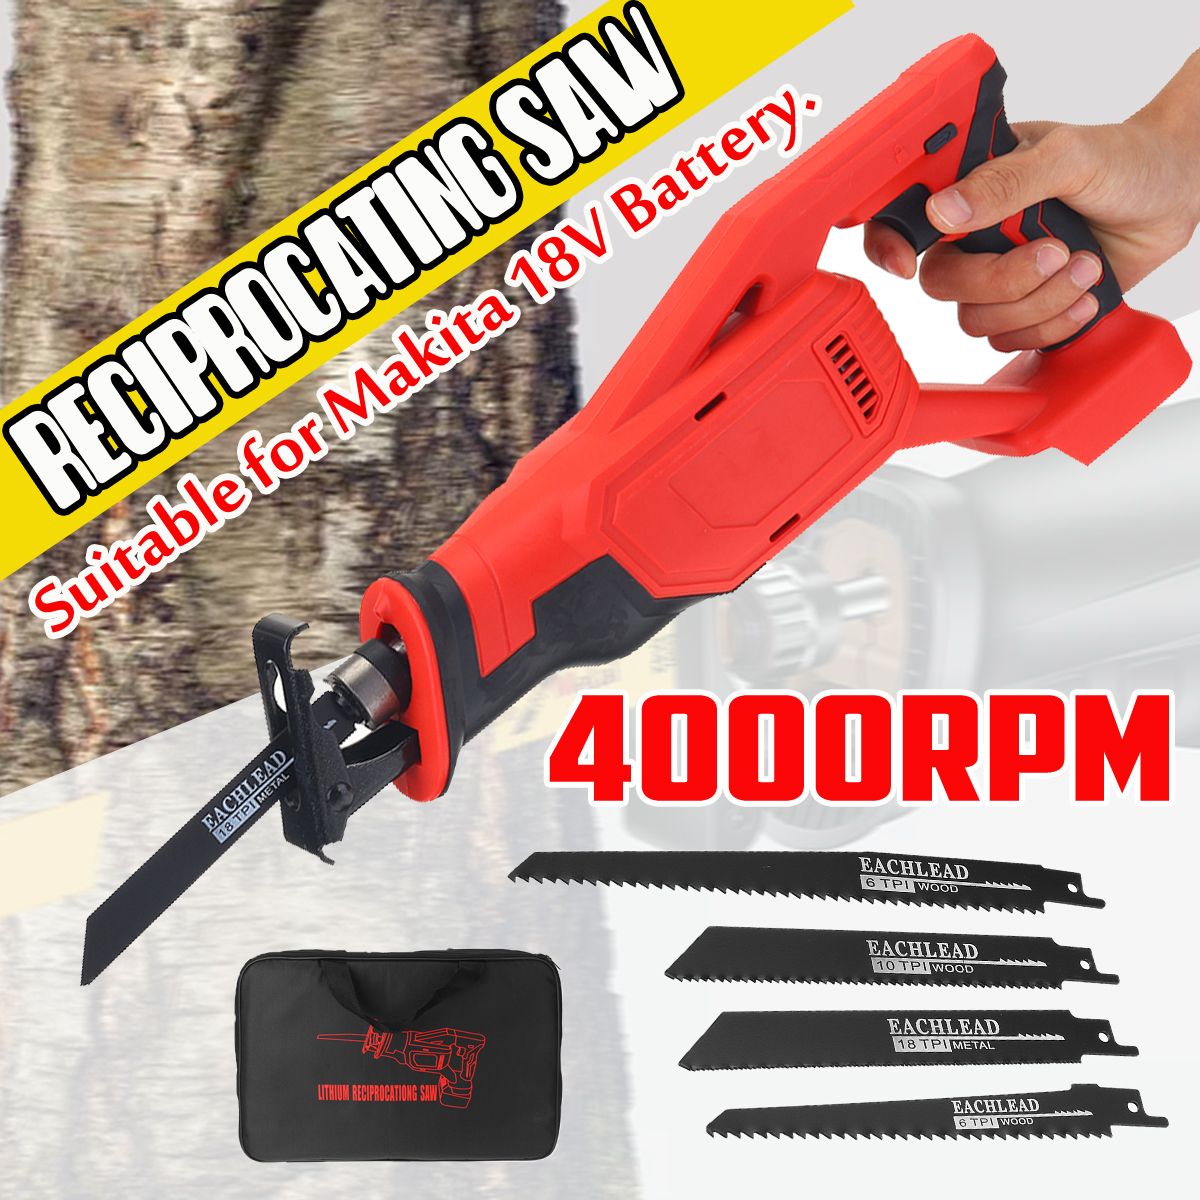 18V-Red-Electric-Reciprocating-Saw-Variable-Speed-Cordless-Wood-Metal-Cutting-Power-Tools-Set-1716395